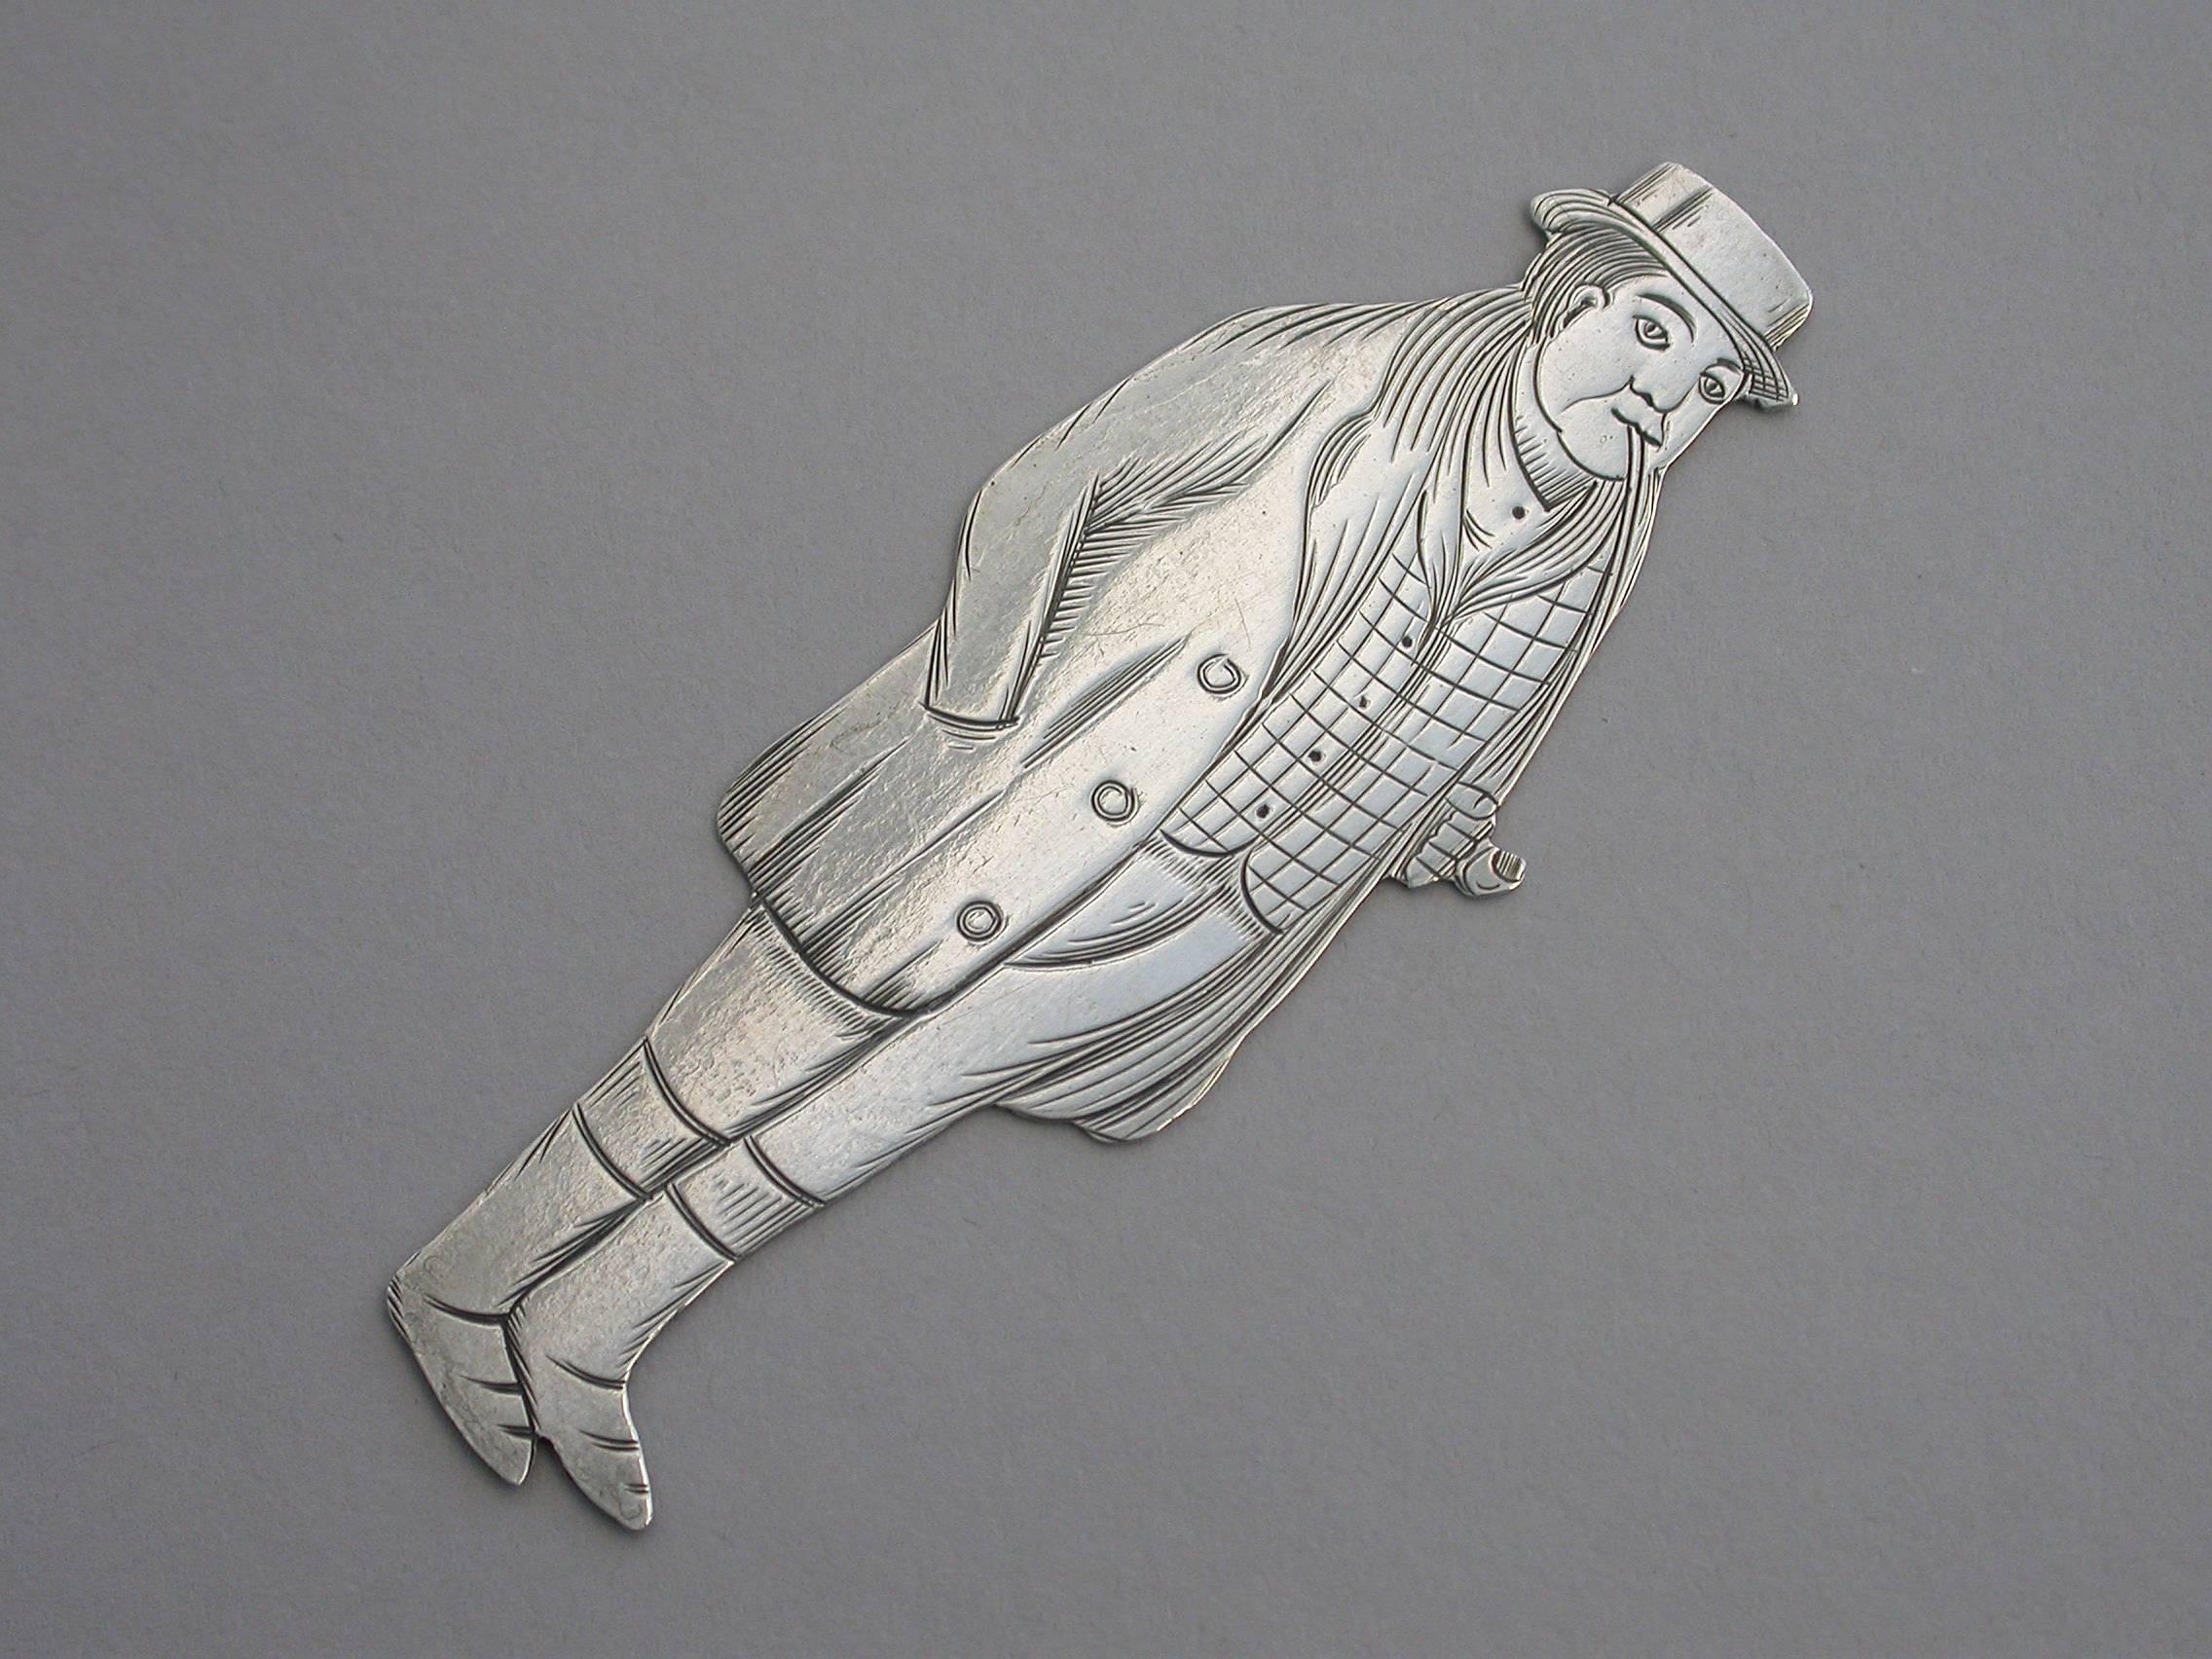 A rare early 20th century American novelty silver figural bookmark, depicting the character Tony Weller, from the Charles Dickens novel The Pickwick Papers.

By J F Fradley, New York, circa 1901-1910.

Note: No cut-out slot for use as a